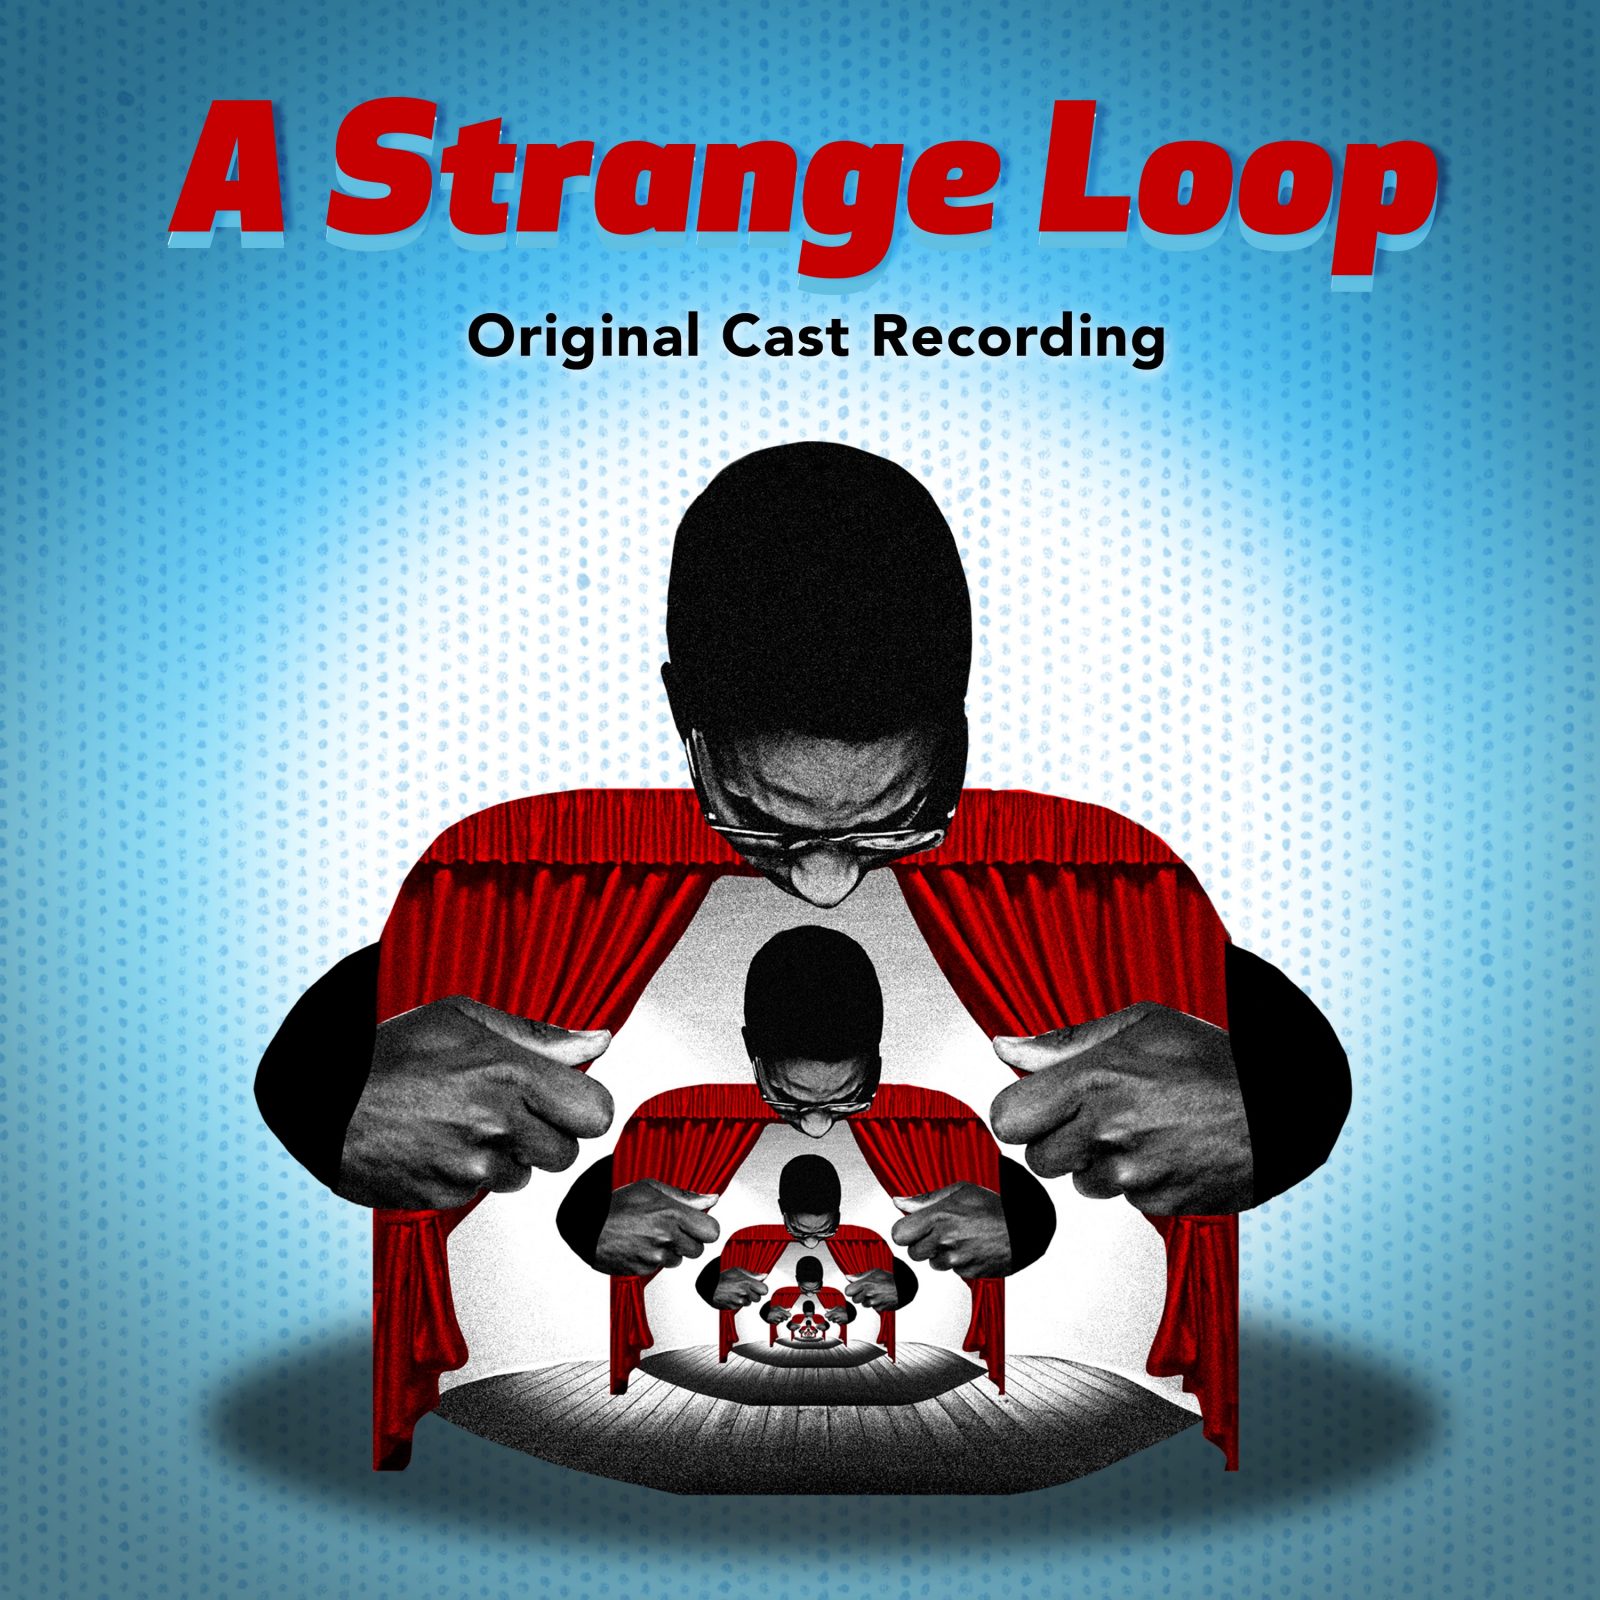 PLAYBILL.COM  – A Strange Loop Available for Pre-Order Now